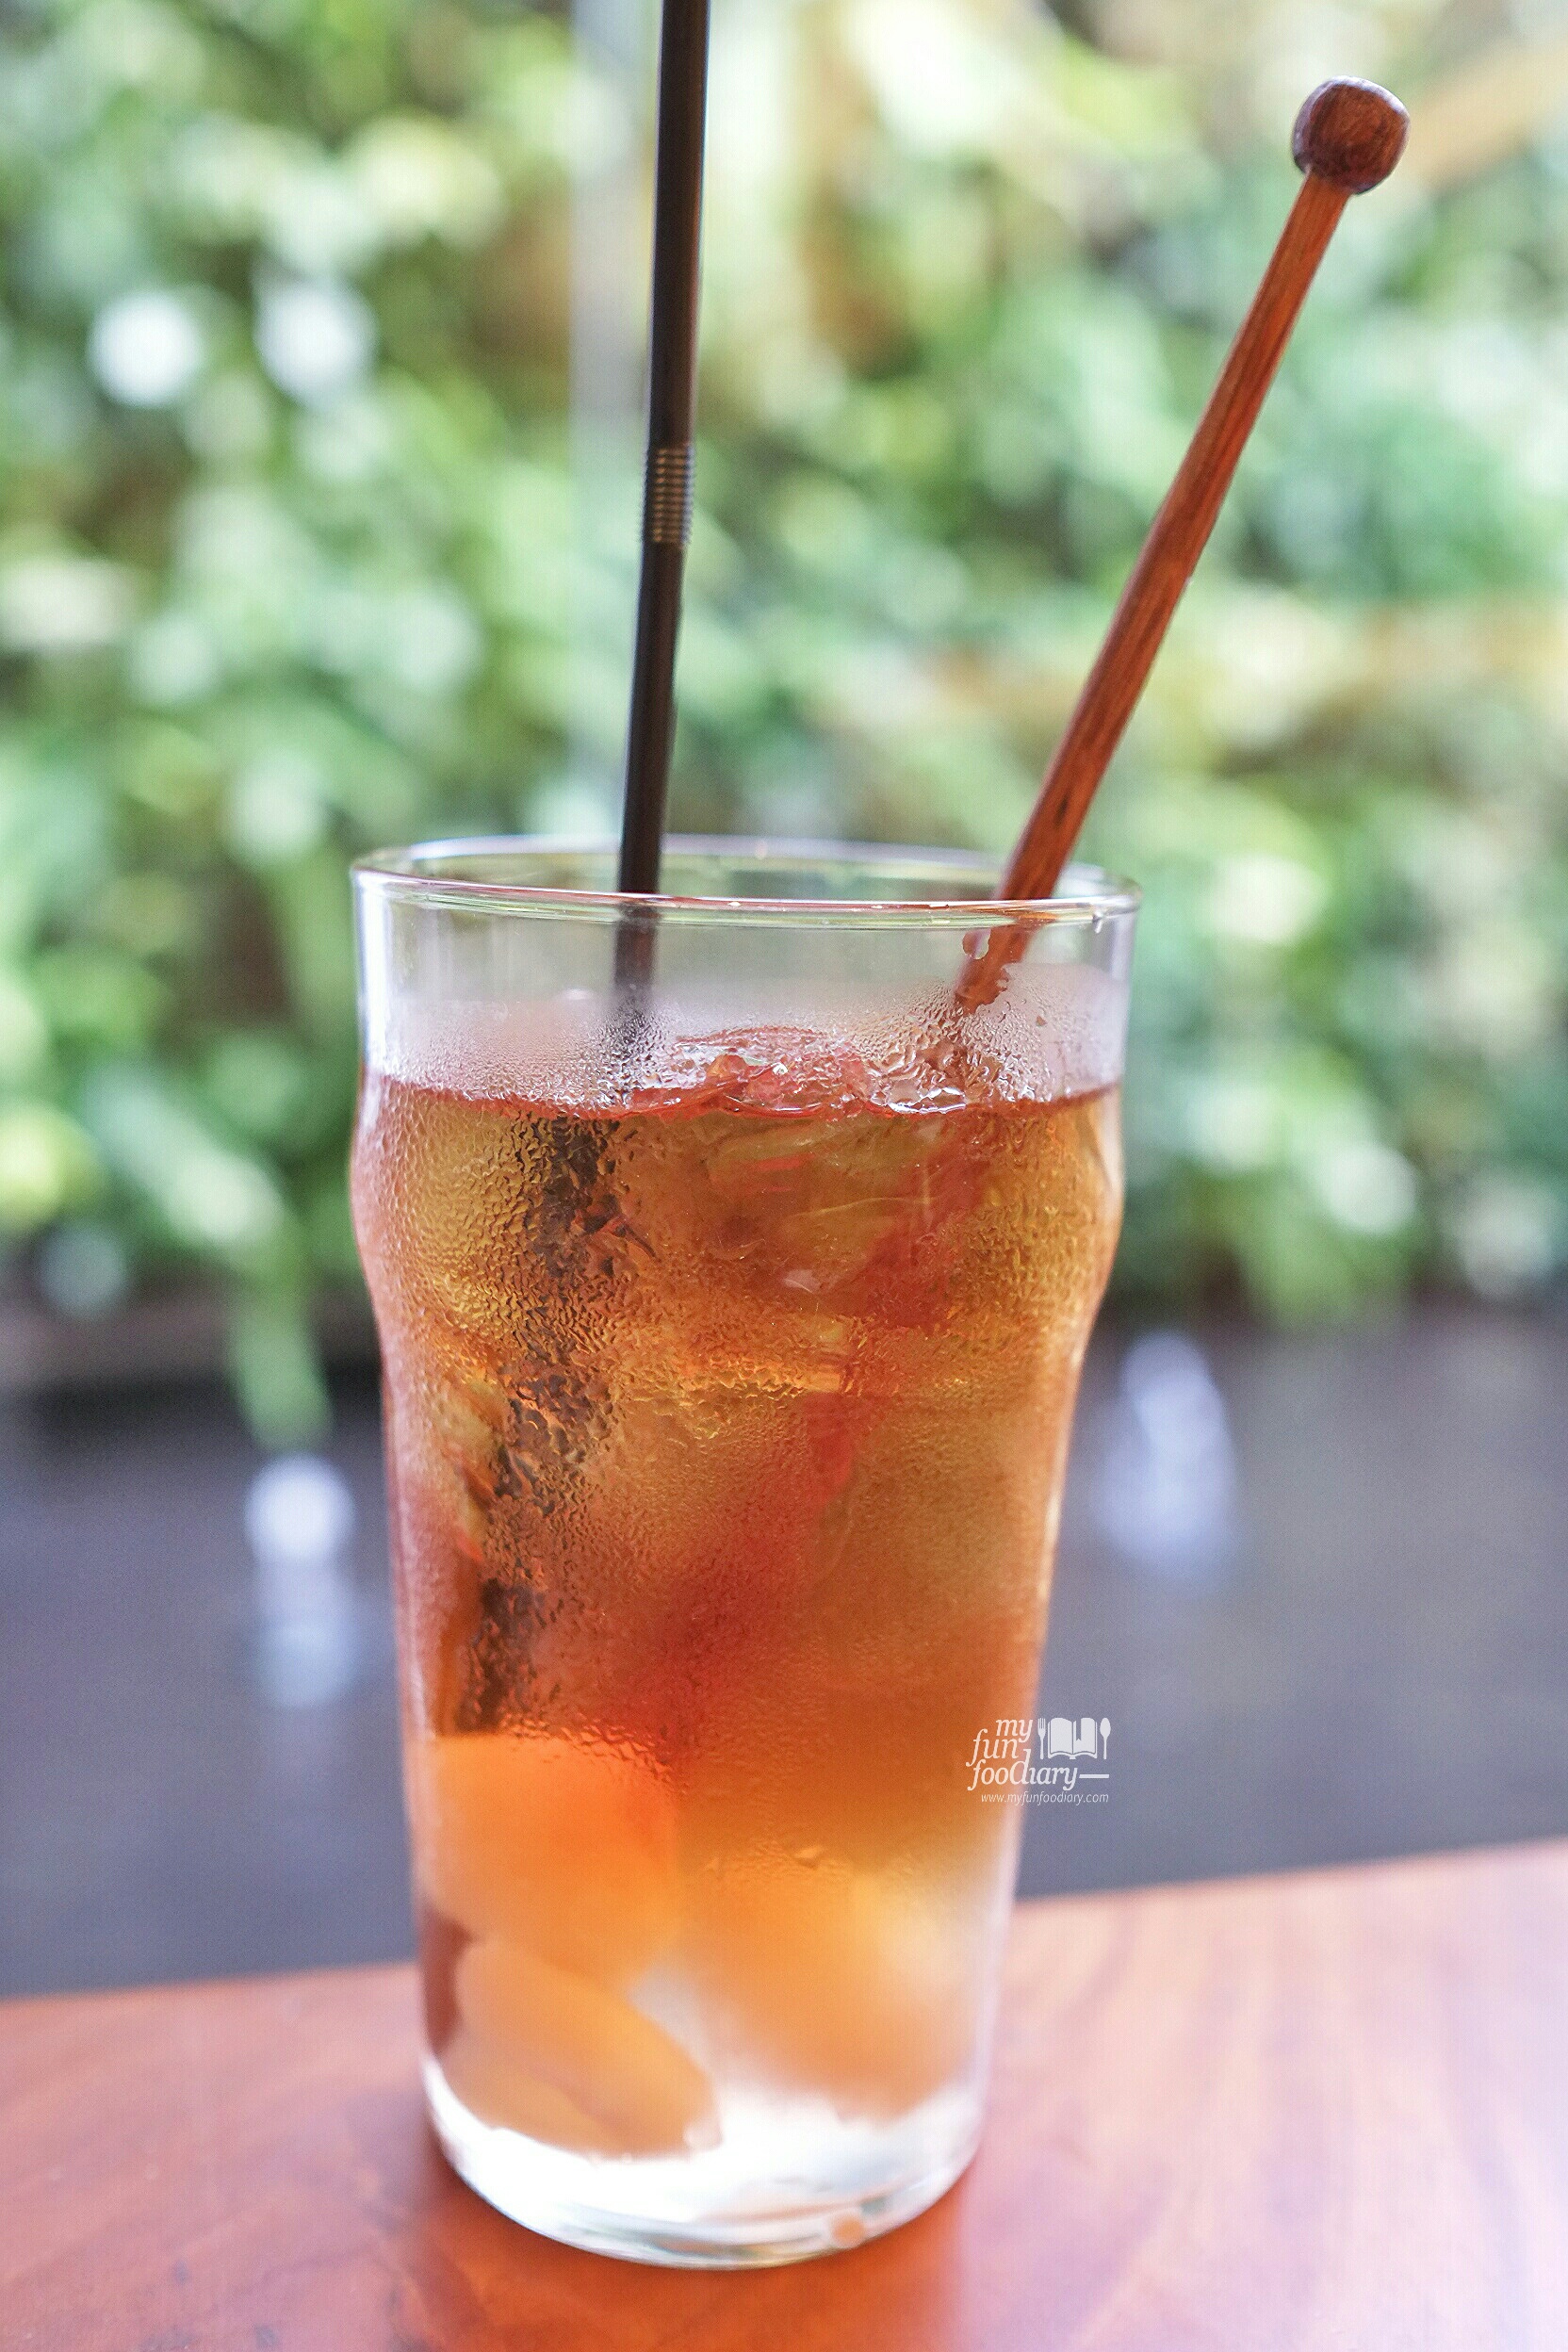 Iced Lychee Tea at Tesate Menteng by Myfunfoodiary